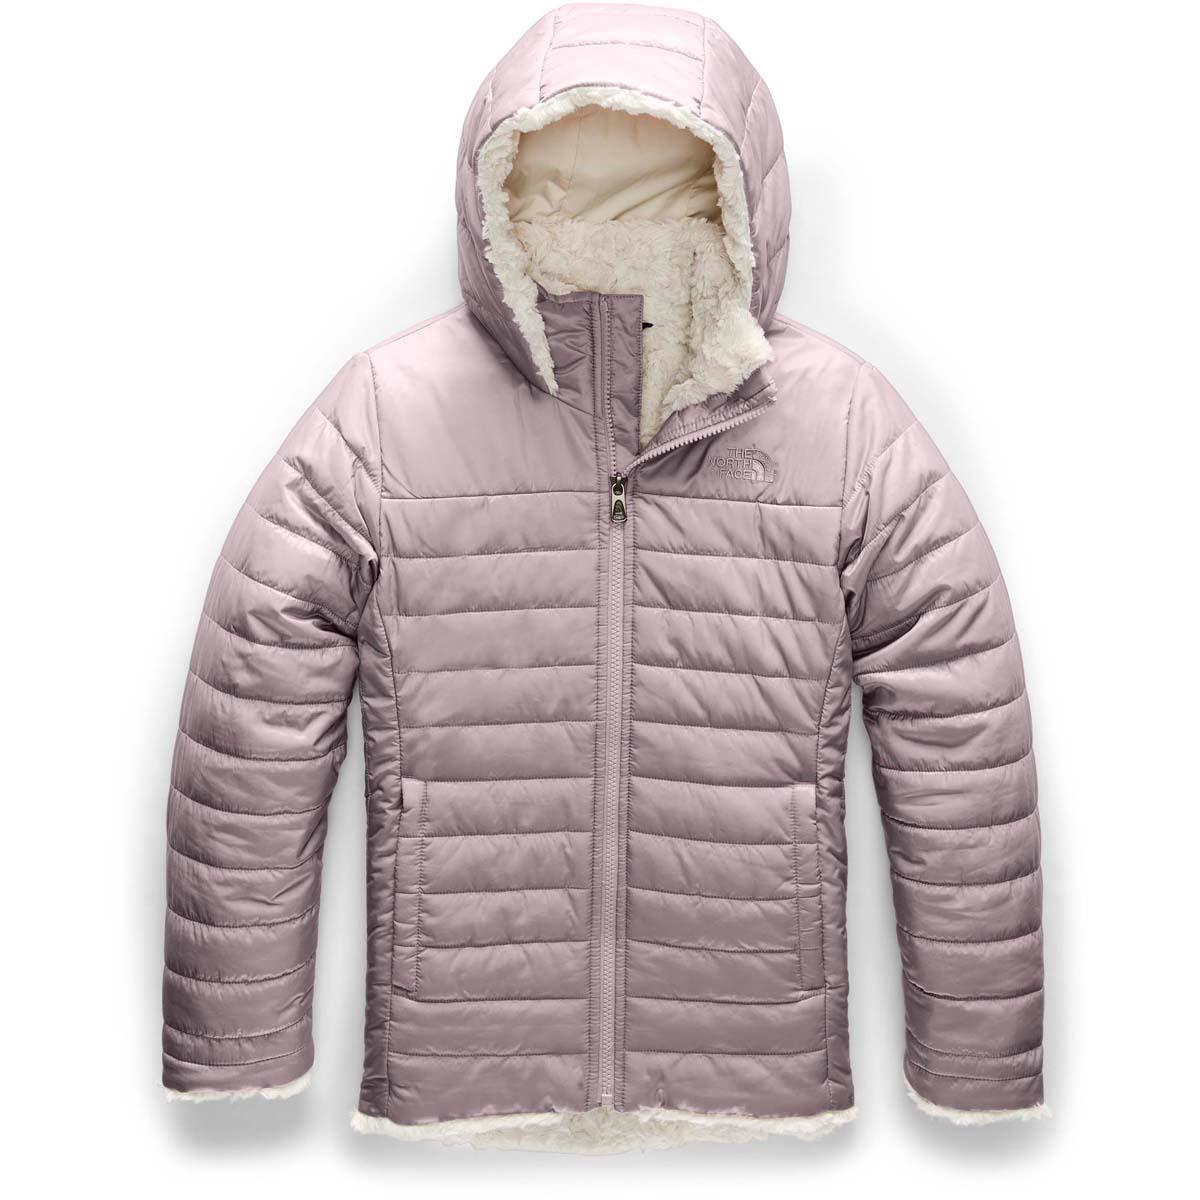 north face girls sizes